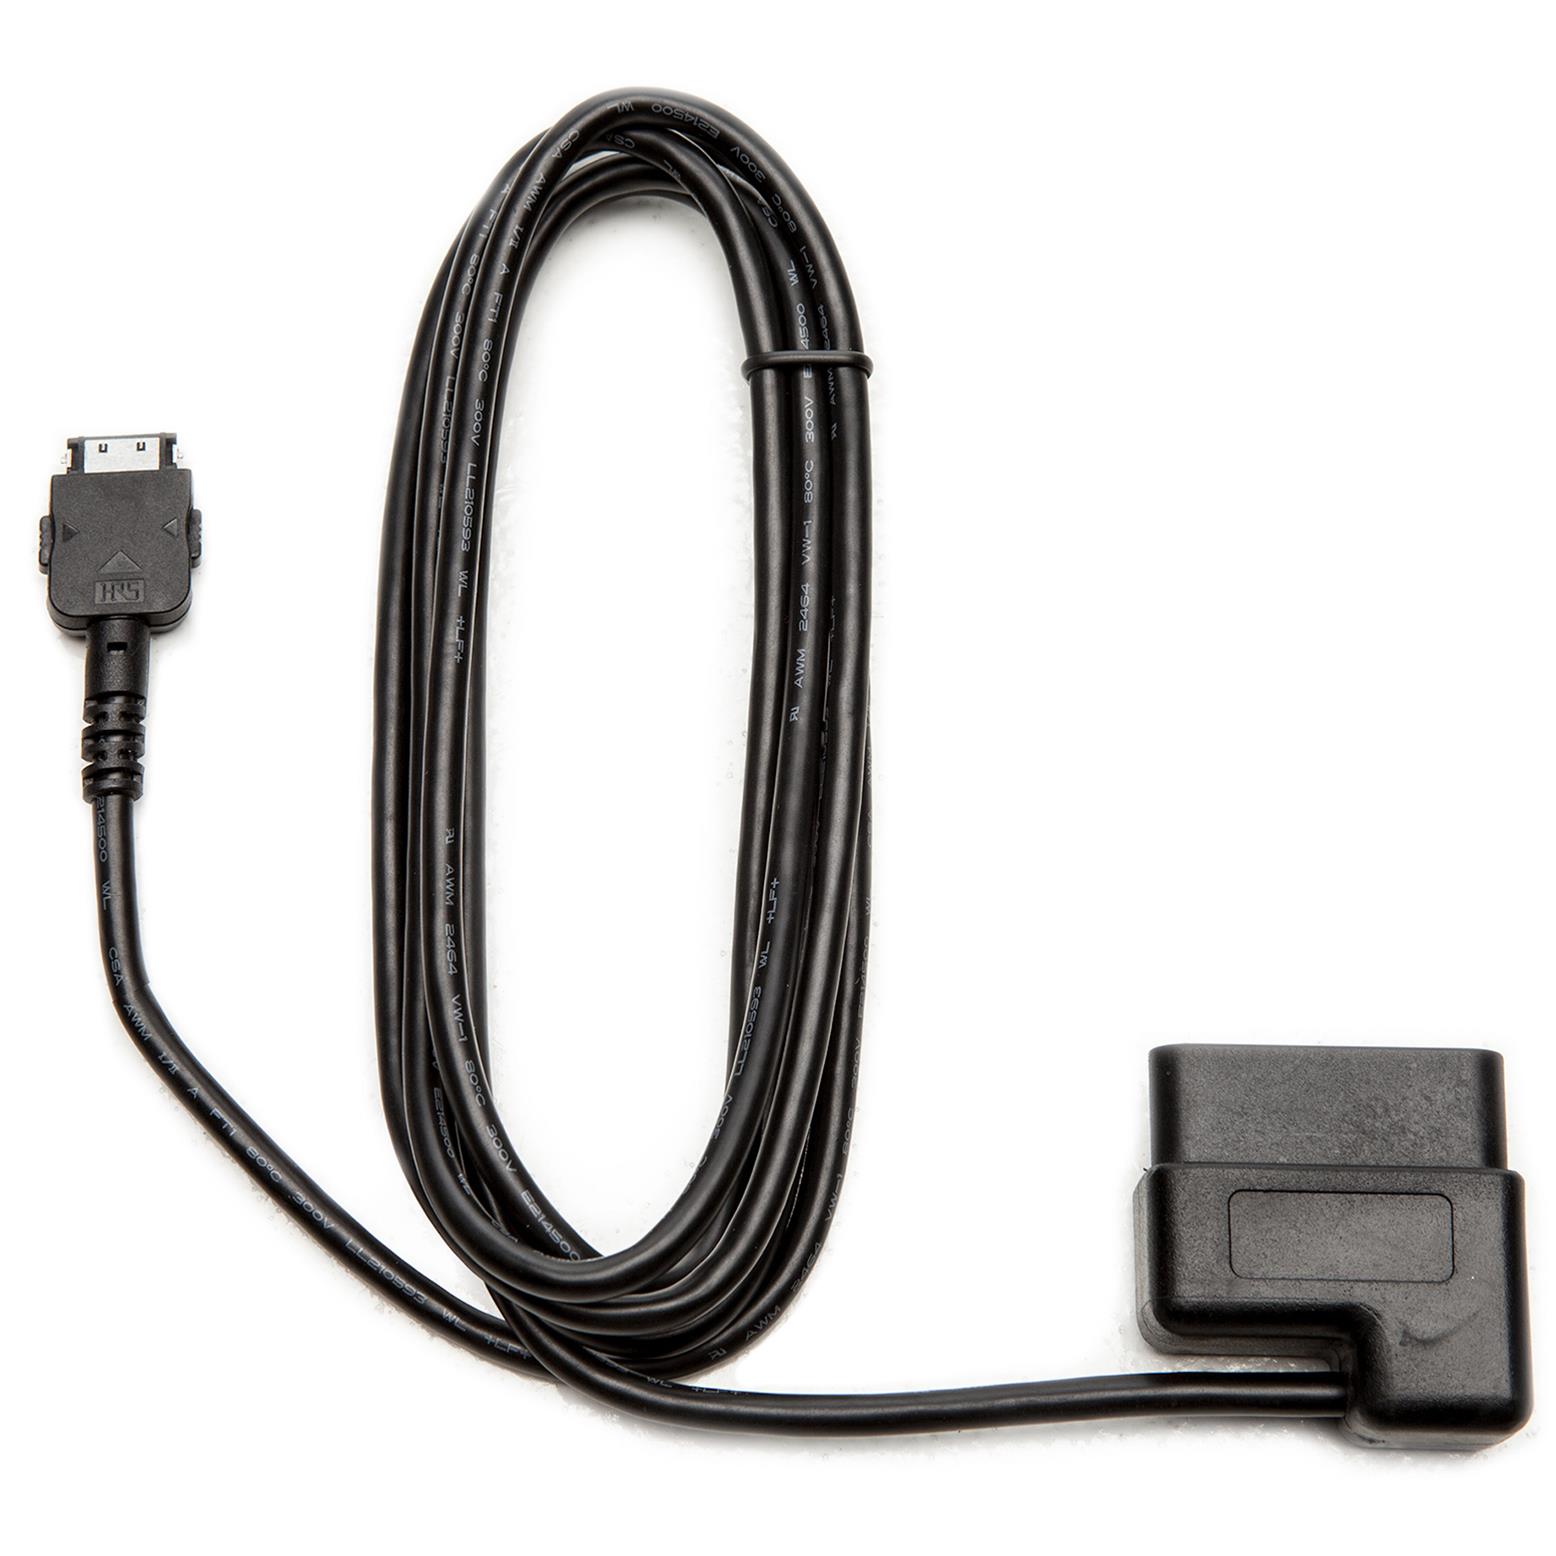 Cobb Products Programmer Accessories AP3-OBDII-CABLE-UNIVERSAL